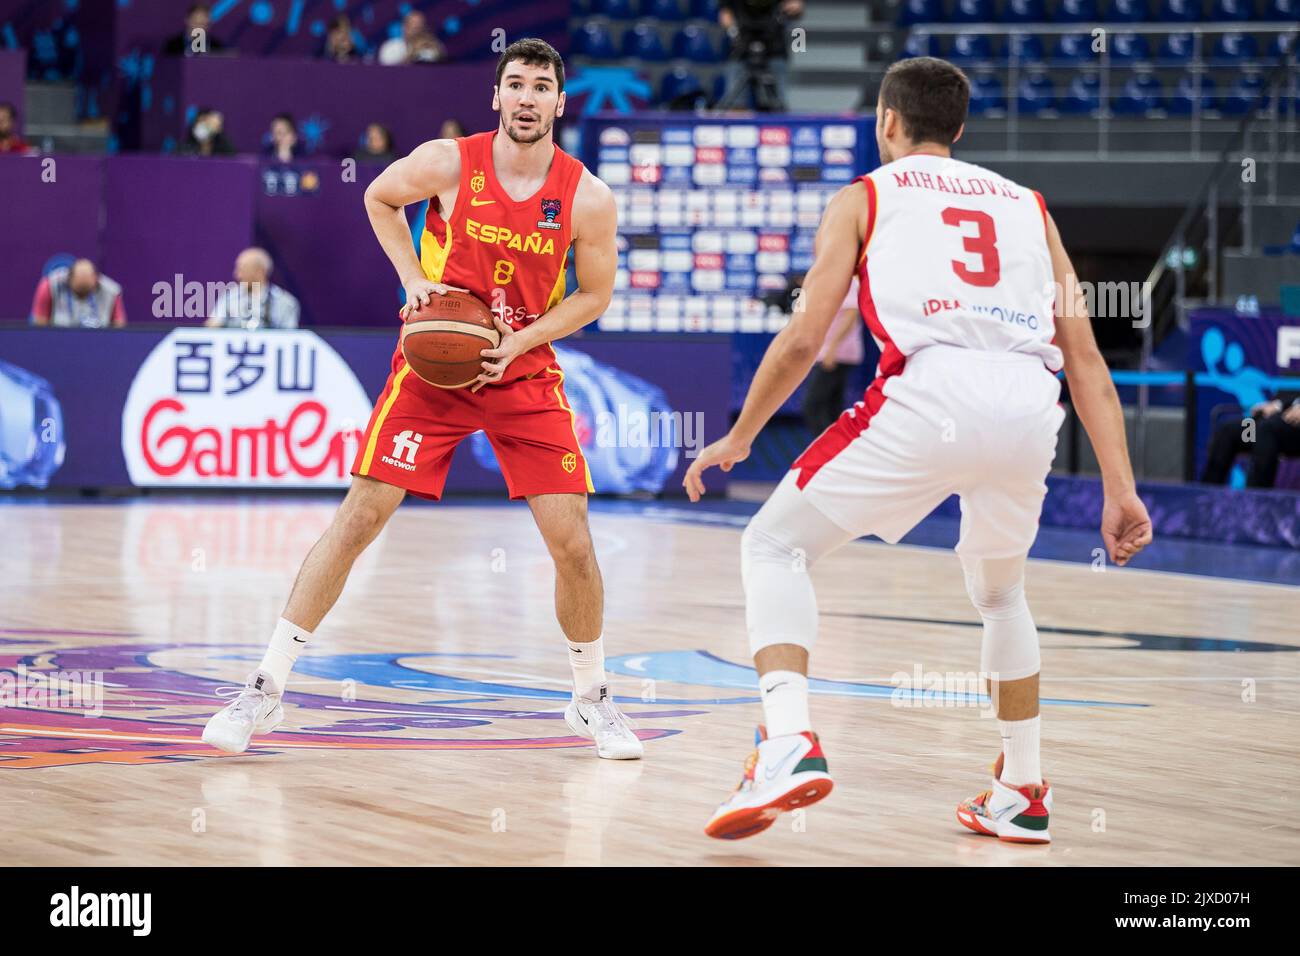 Tbilisi, Georgia, 6th September 2022. Dario Brizuela of Spain in actio during the FIBA EuroBasket 2022 group A match between Montenegro and Spain at Tbilisi Arena in Tbilisi, Georgia. September 6, 2022. Credit: Nikola Krstic/Alamy Stock Photo